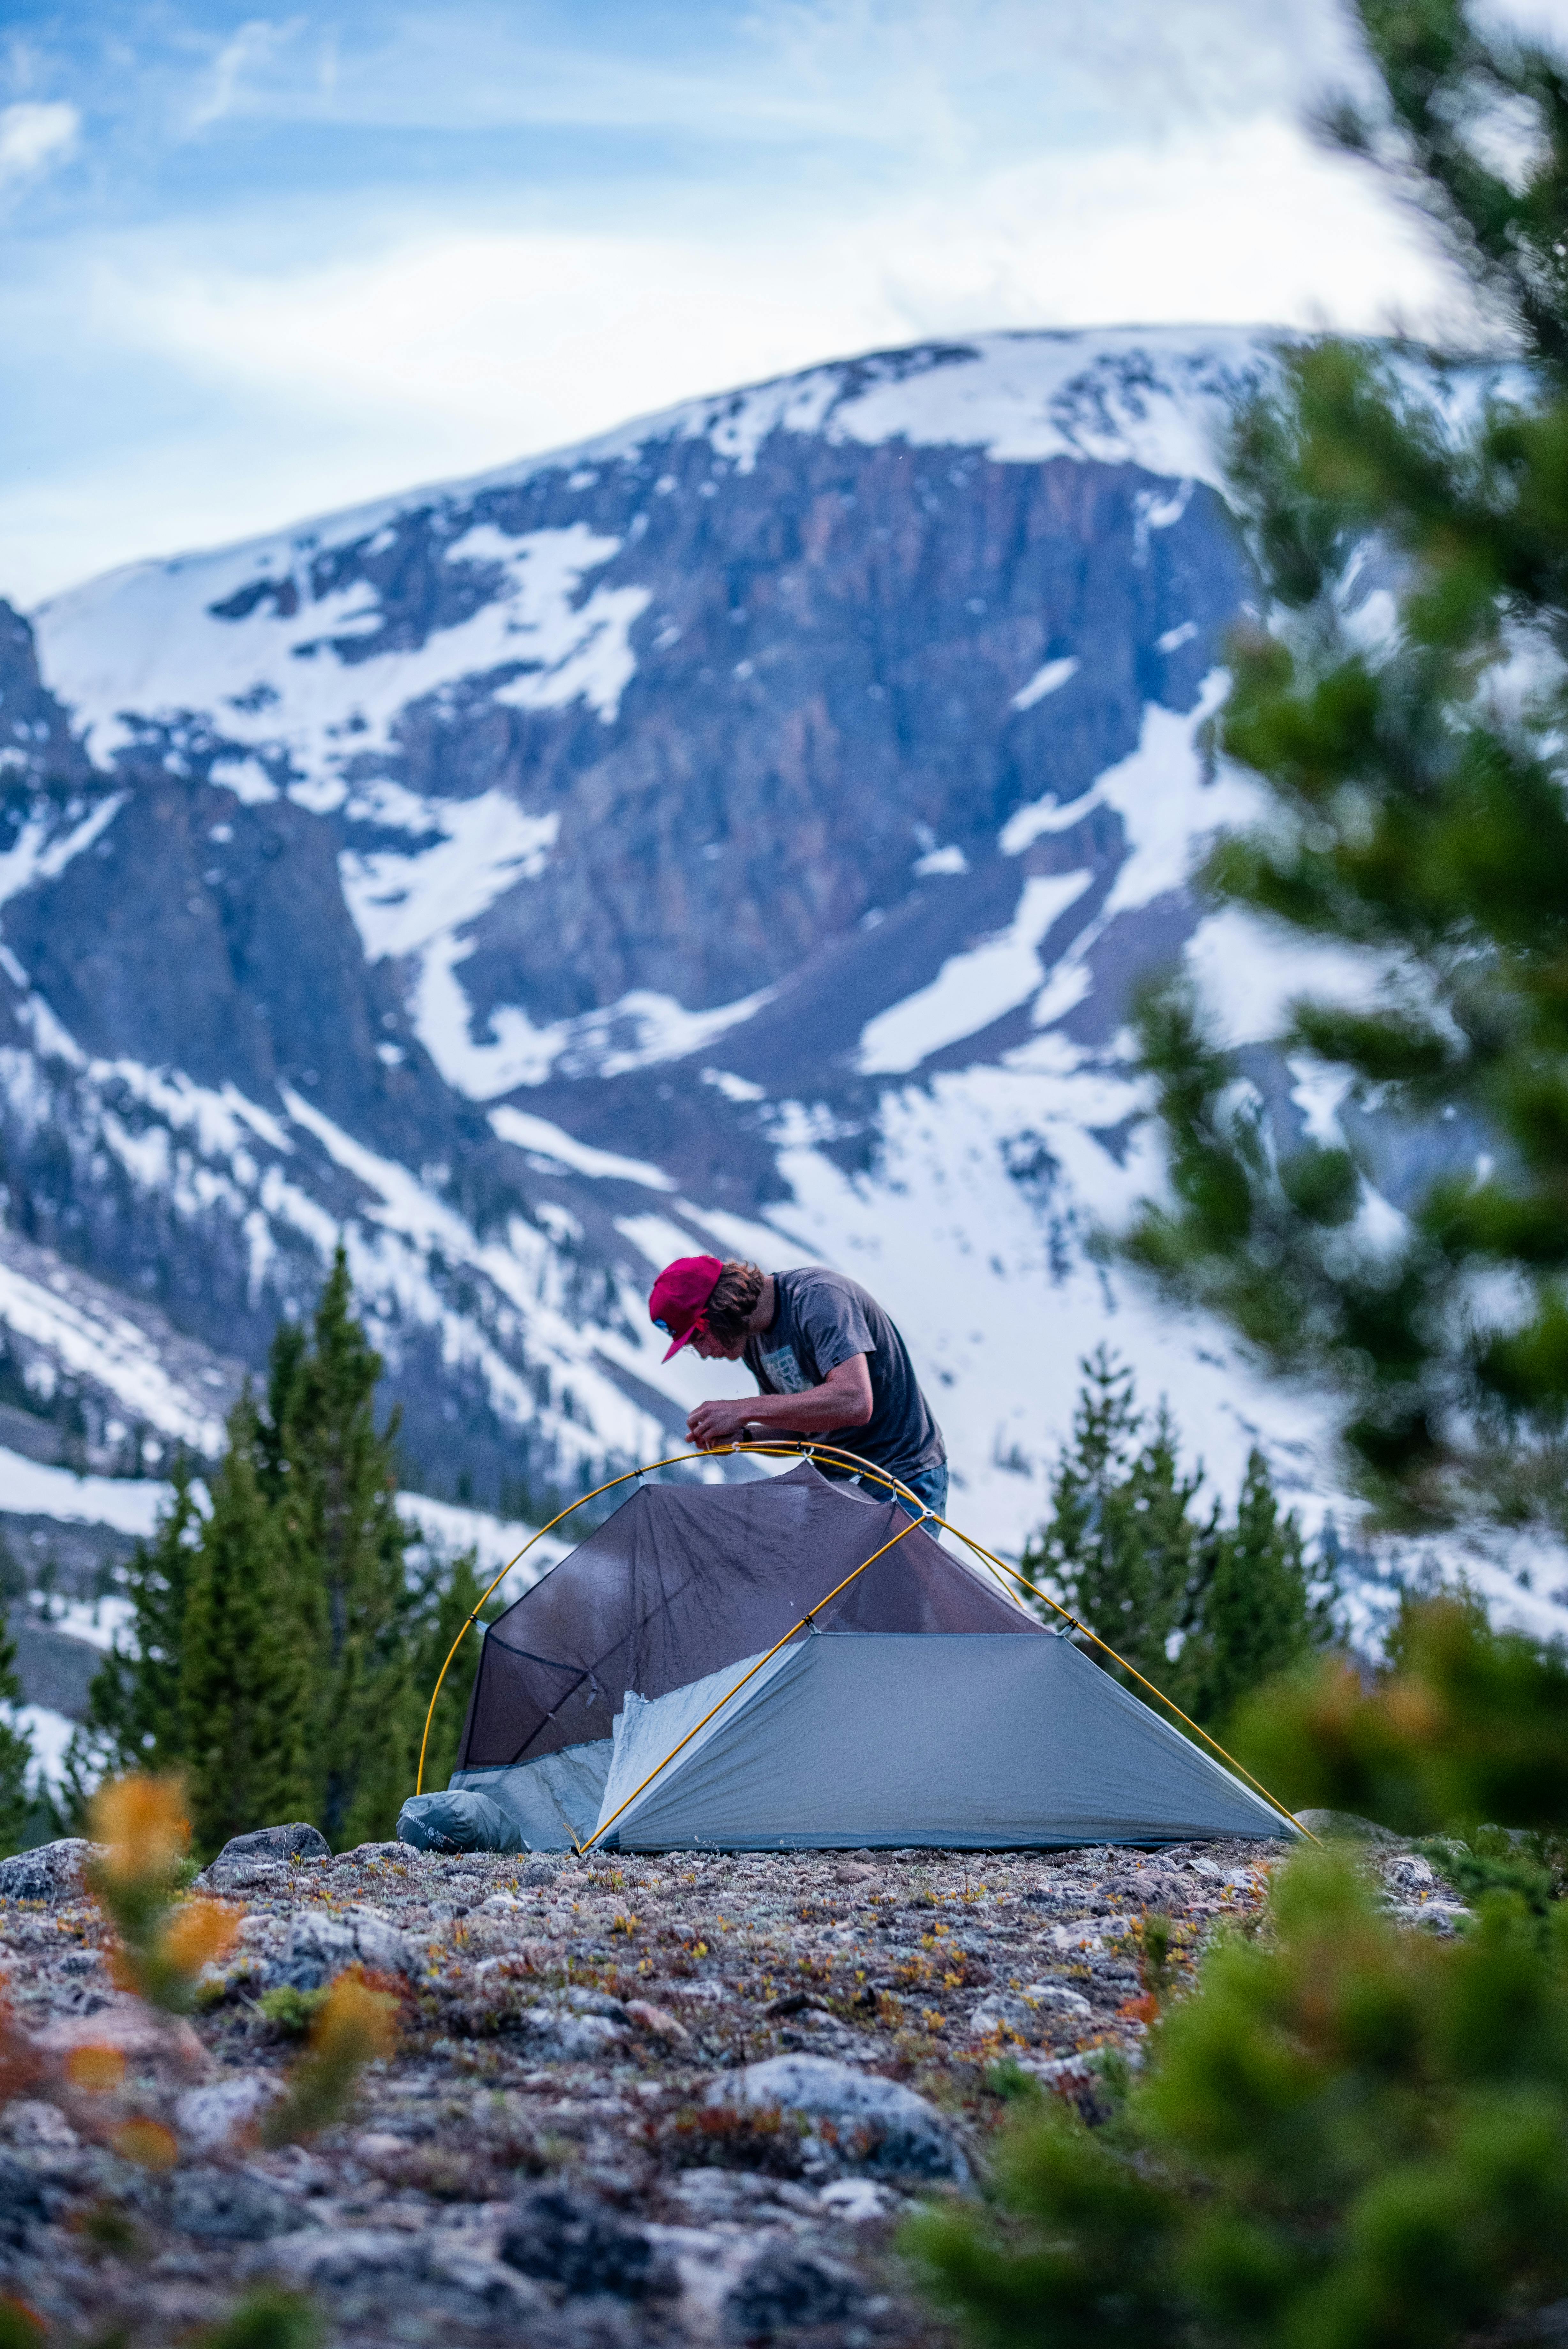 A man in a red hat sets up his tent in the mountains